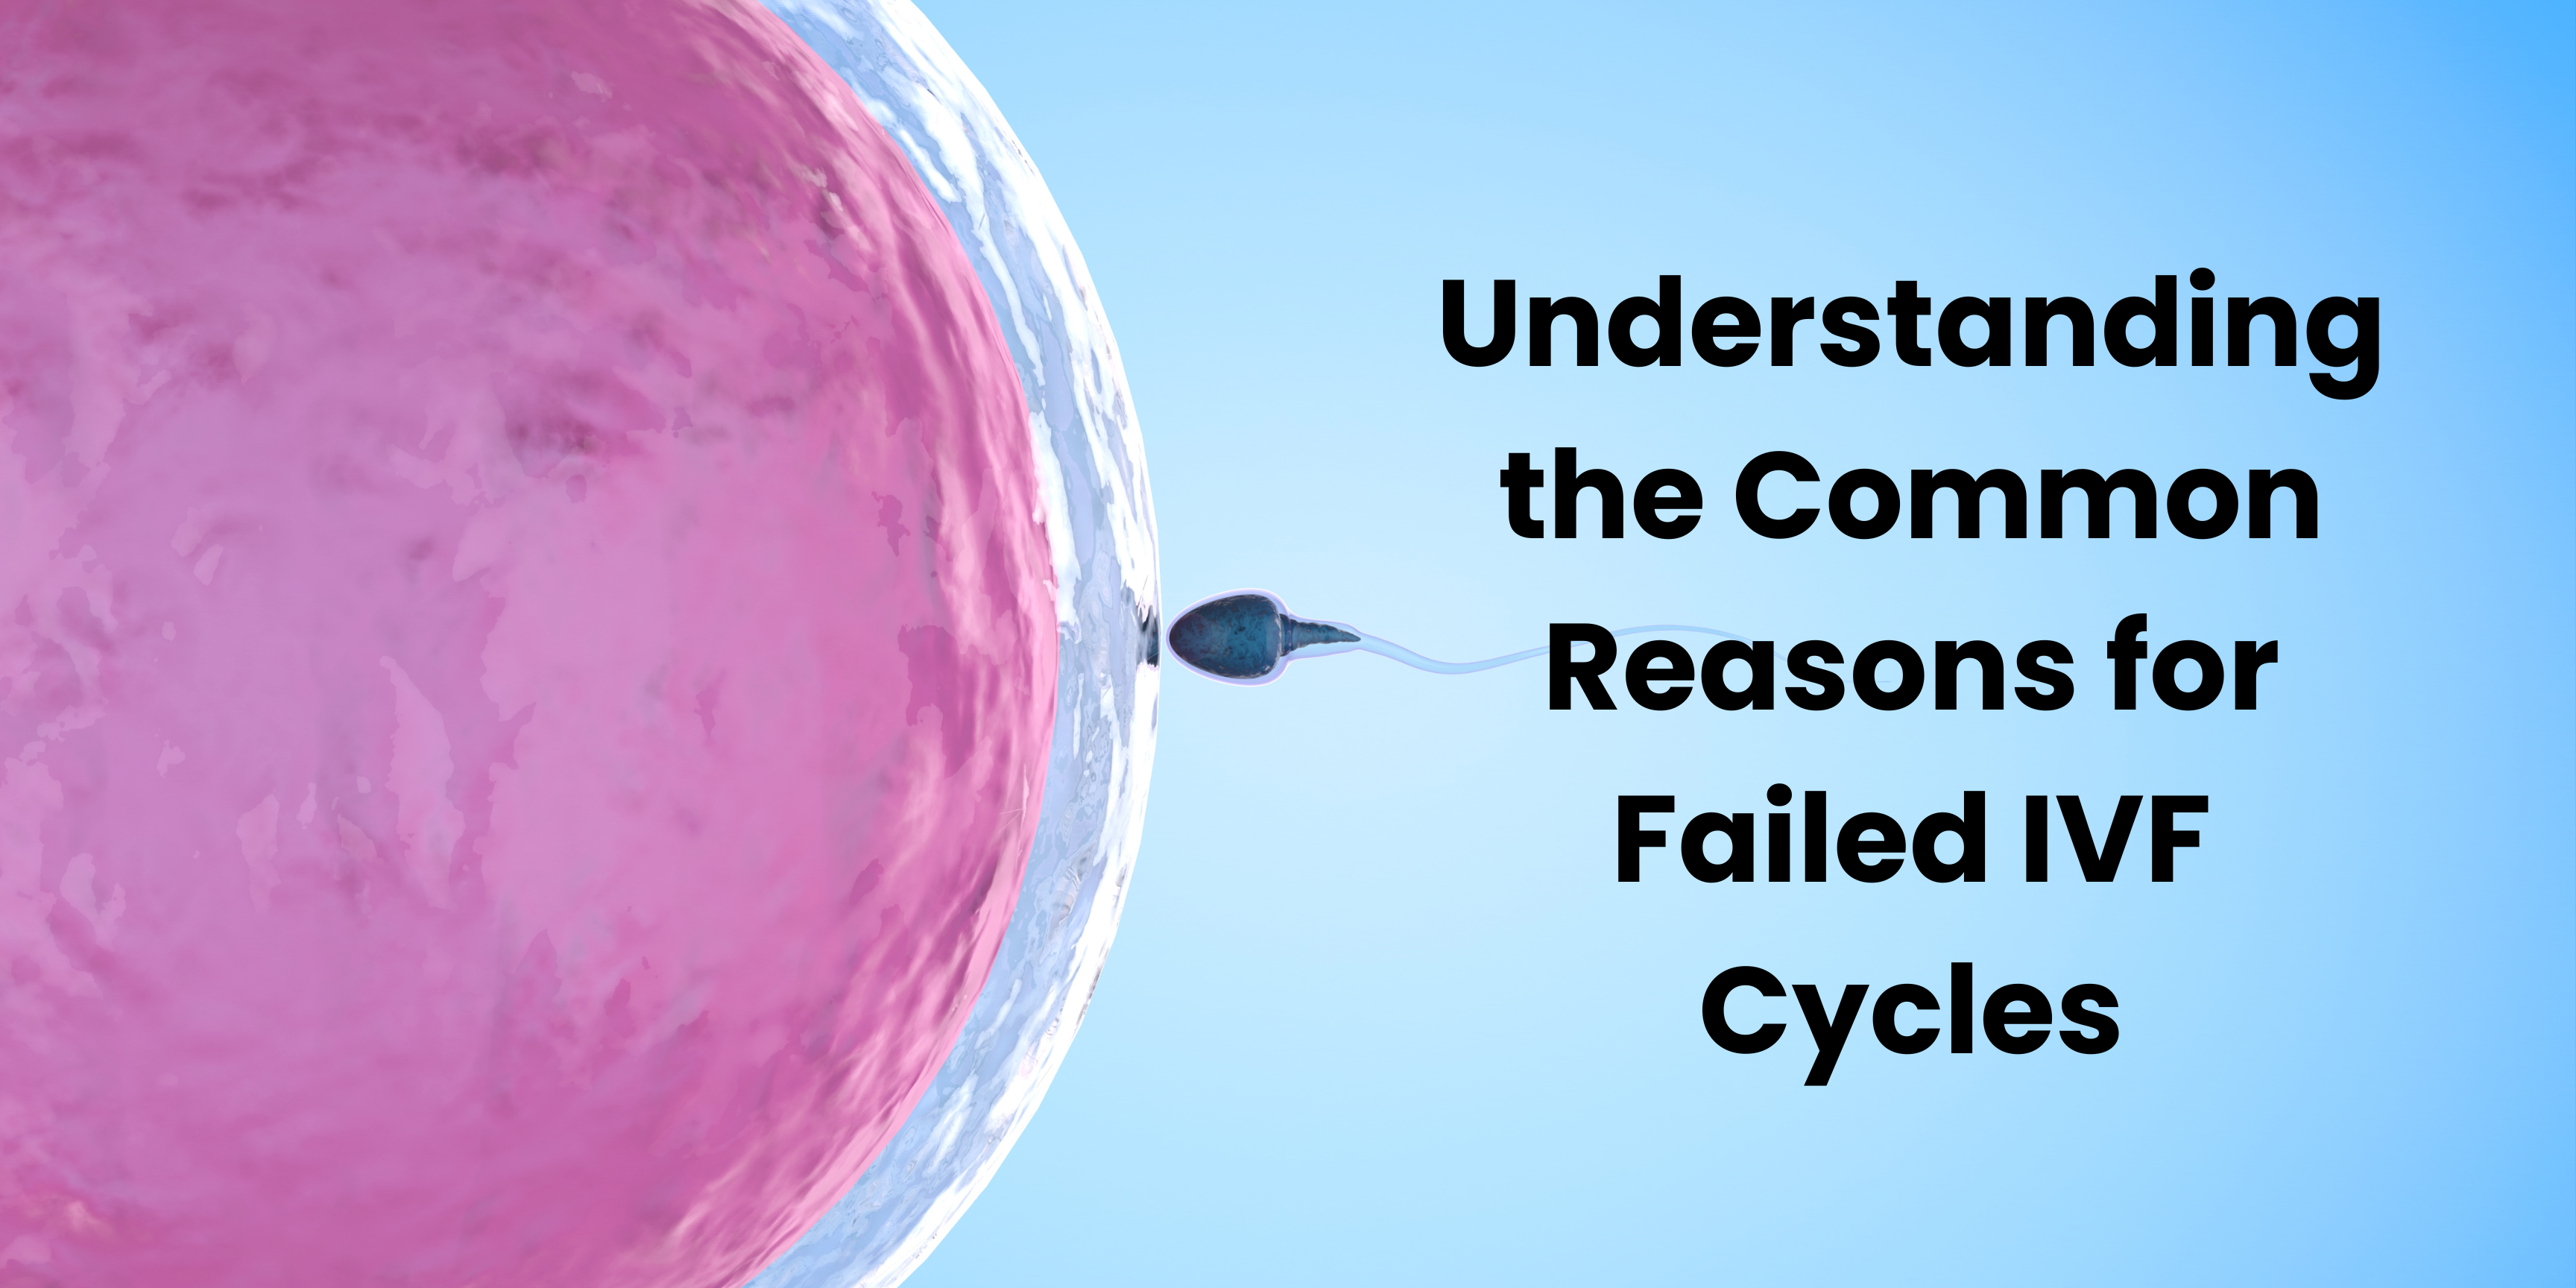 Understanding the Common Reasons for Failed IVF Cycles